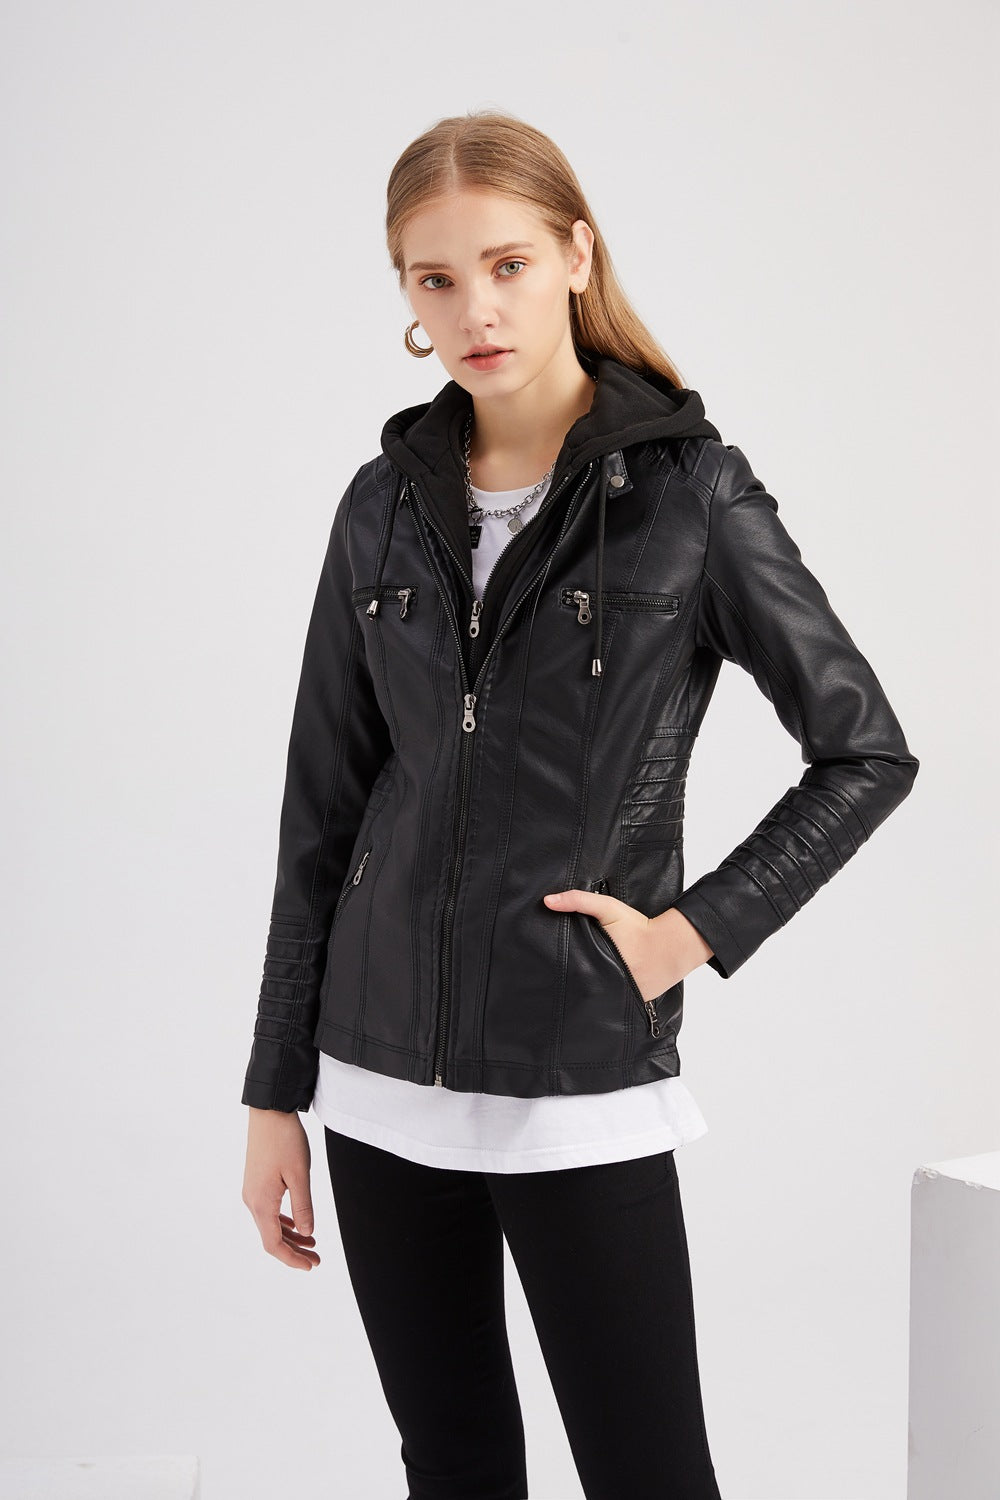 Women's Hooded Leather Jacket Two-Piece Detachable Leather Jacket ...